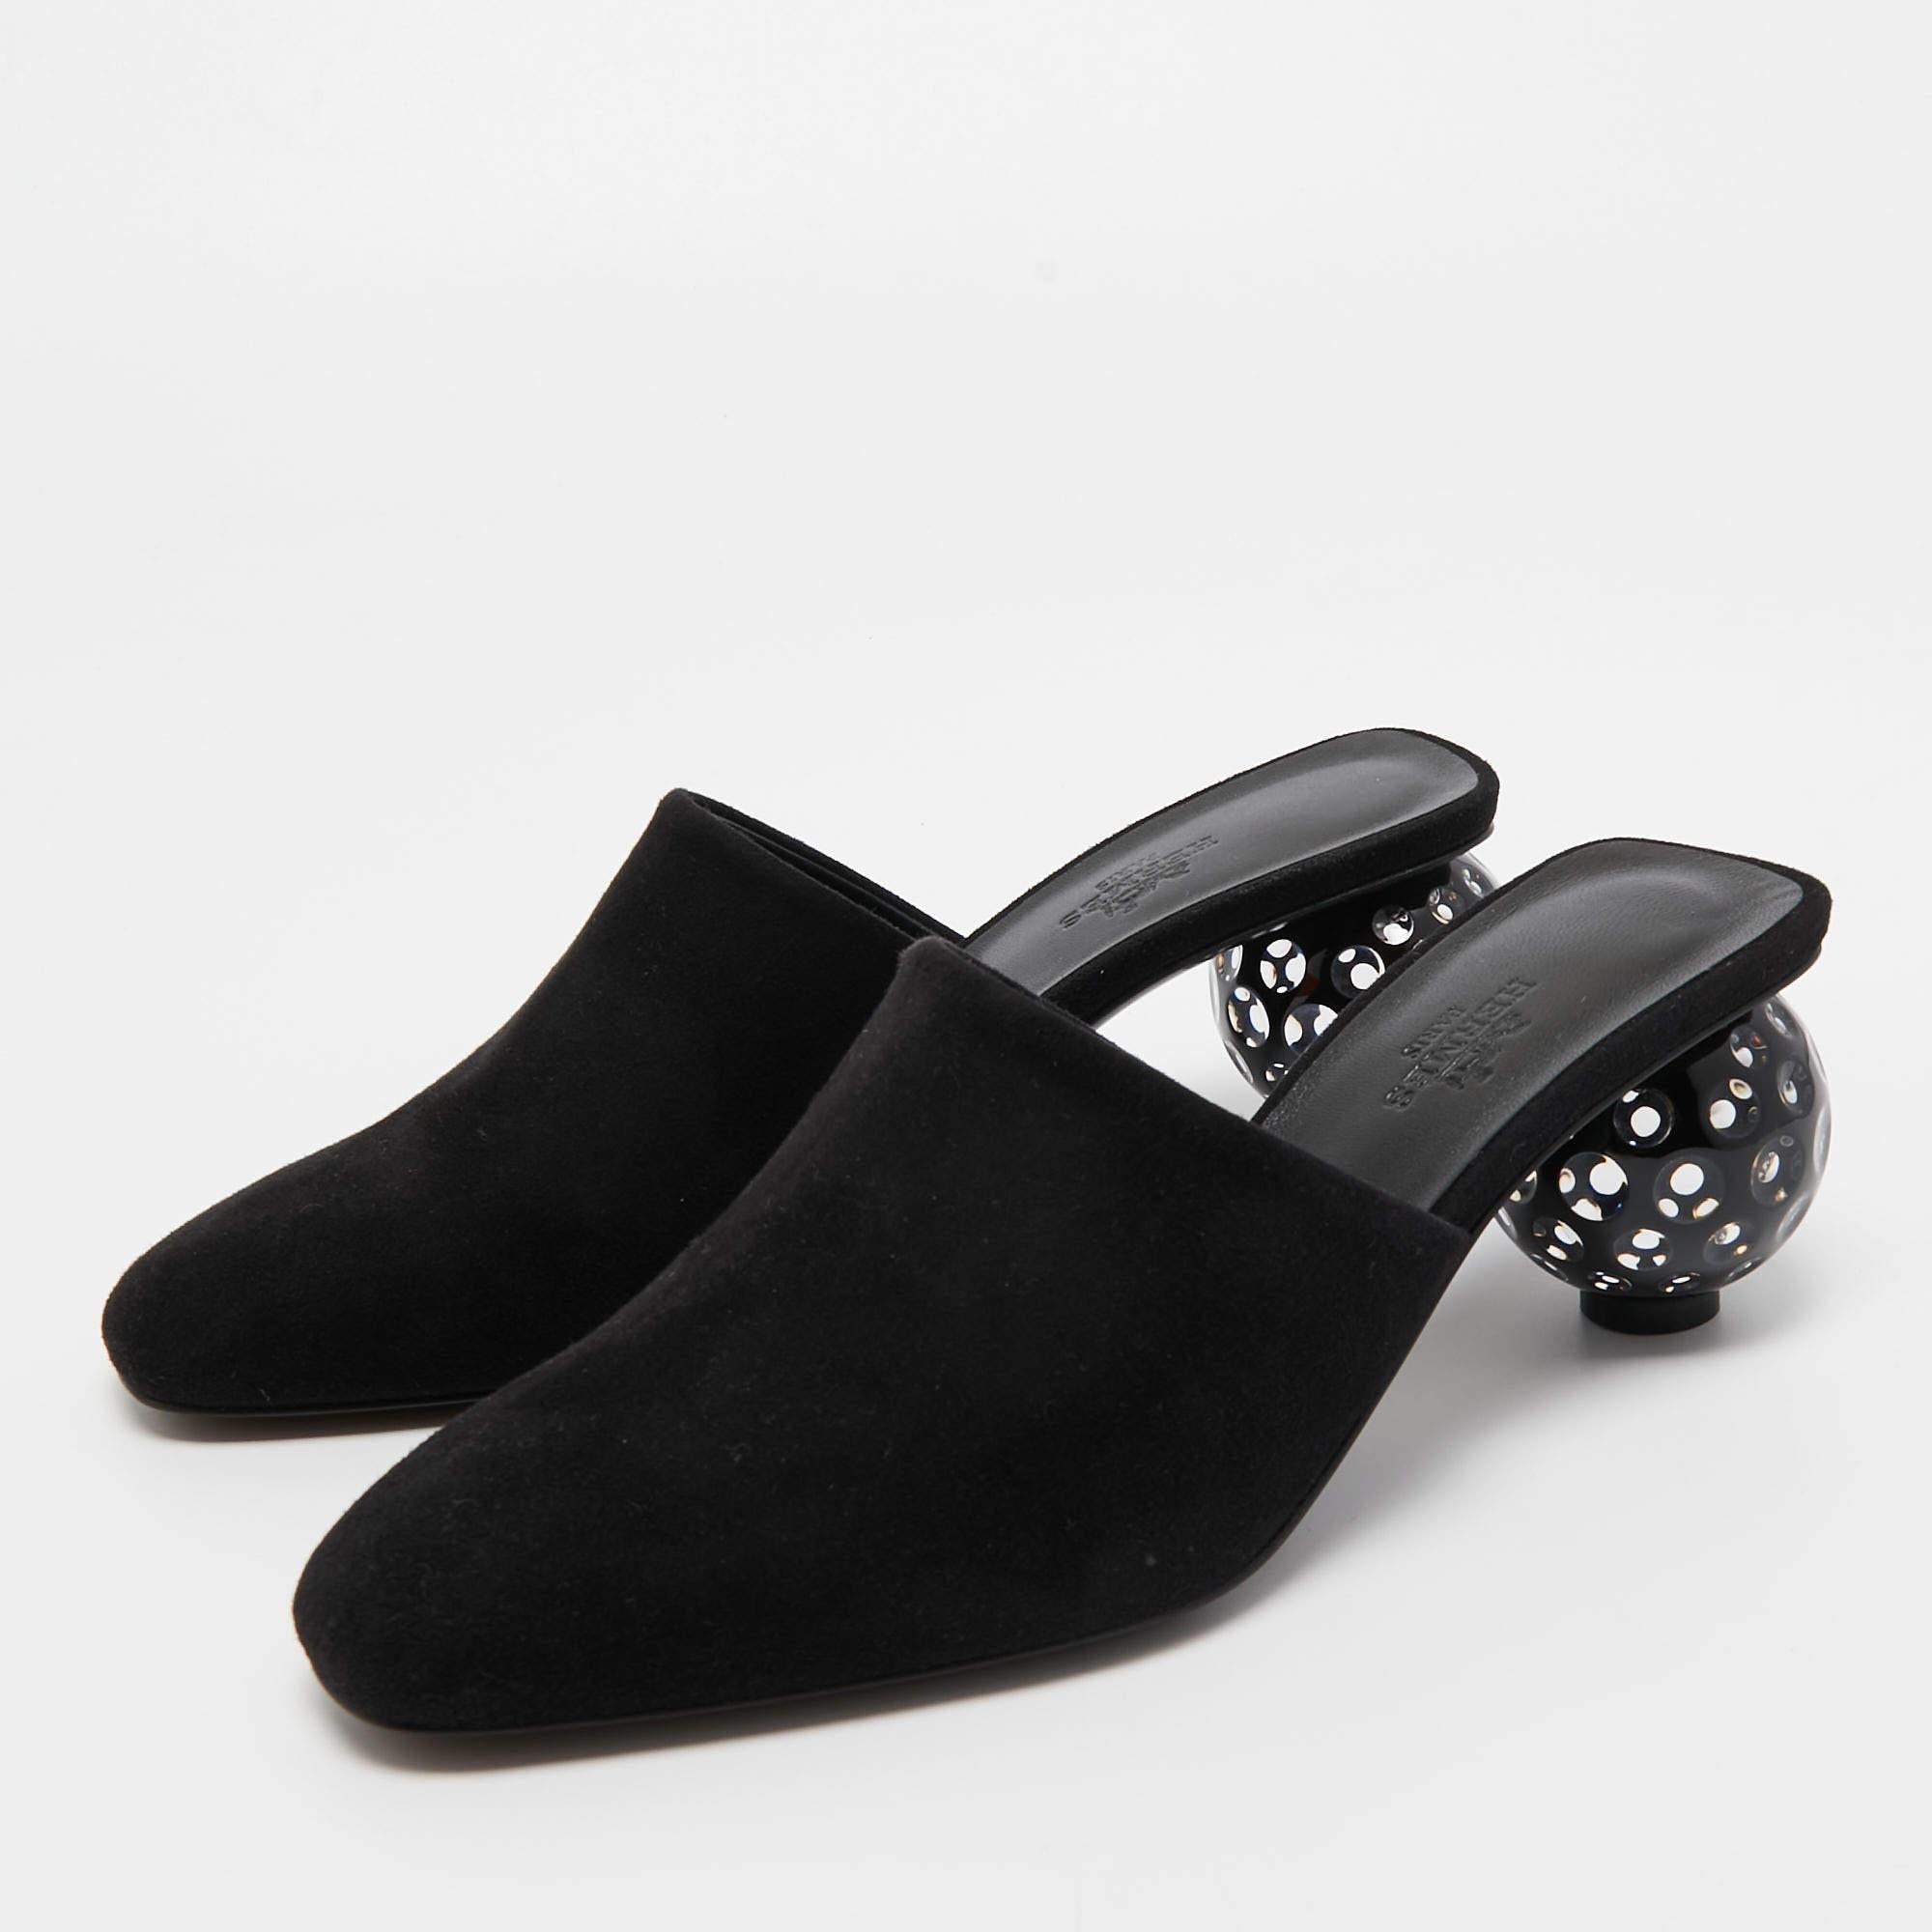 A perfect blend of luxury, style, and comfort, these designer mules are made using quality materials and frame your feet in the most elegant way. They can be paired with a host of outfits from your wardrobe.

Includes: Original Dustbag, Original